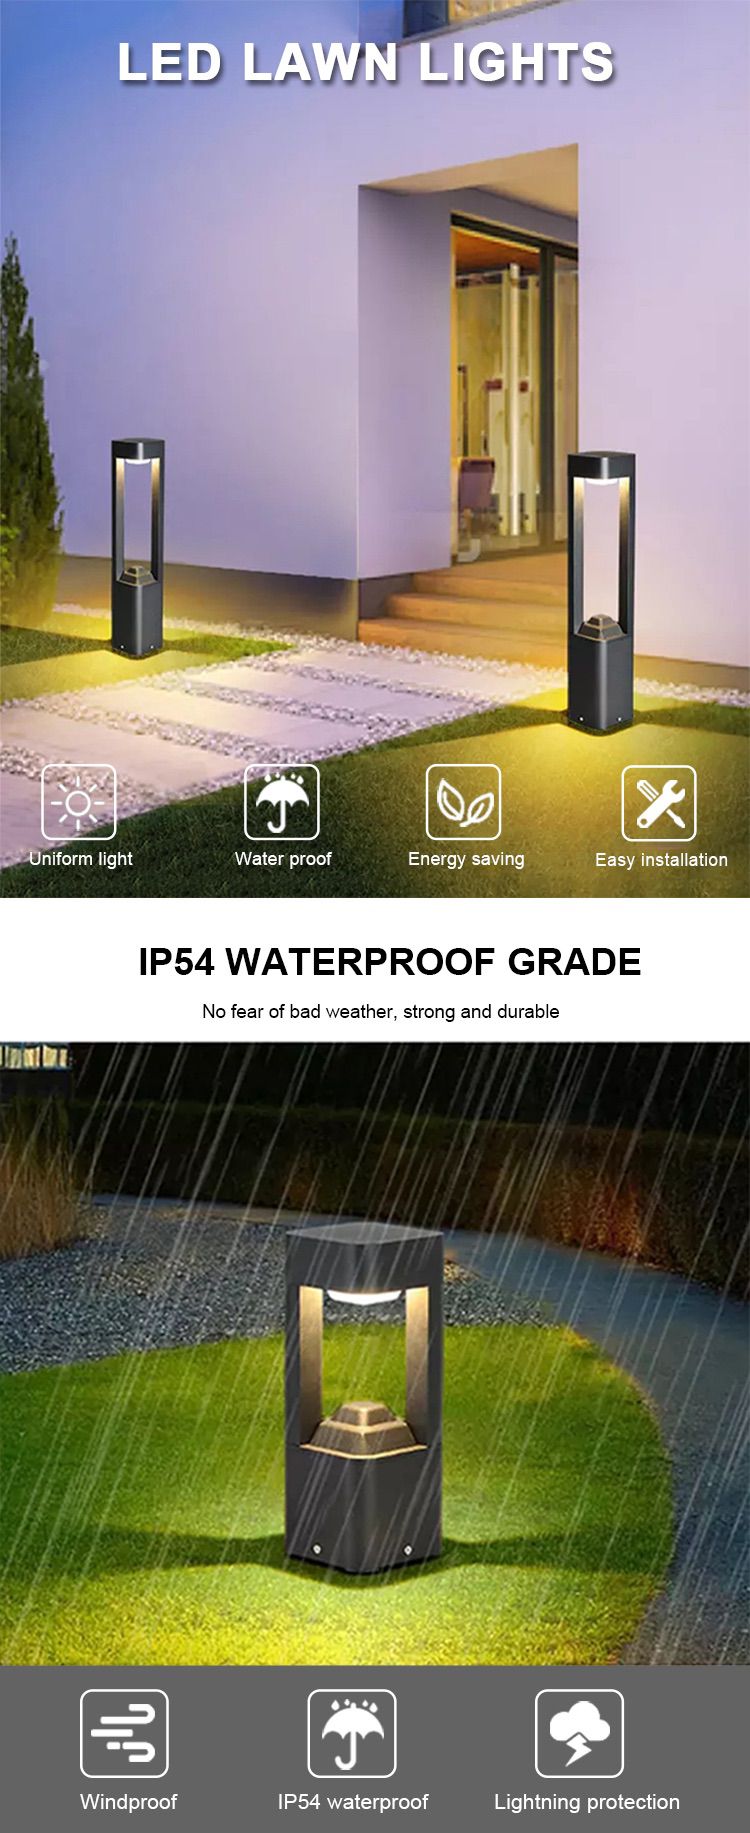 3-LED lawn light for pathway decorative lighting